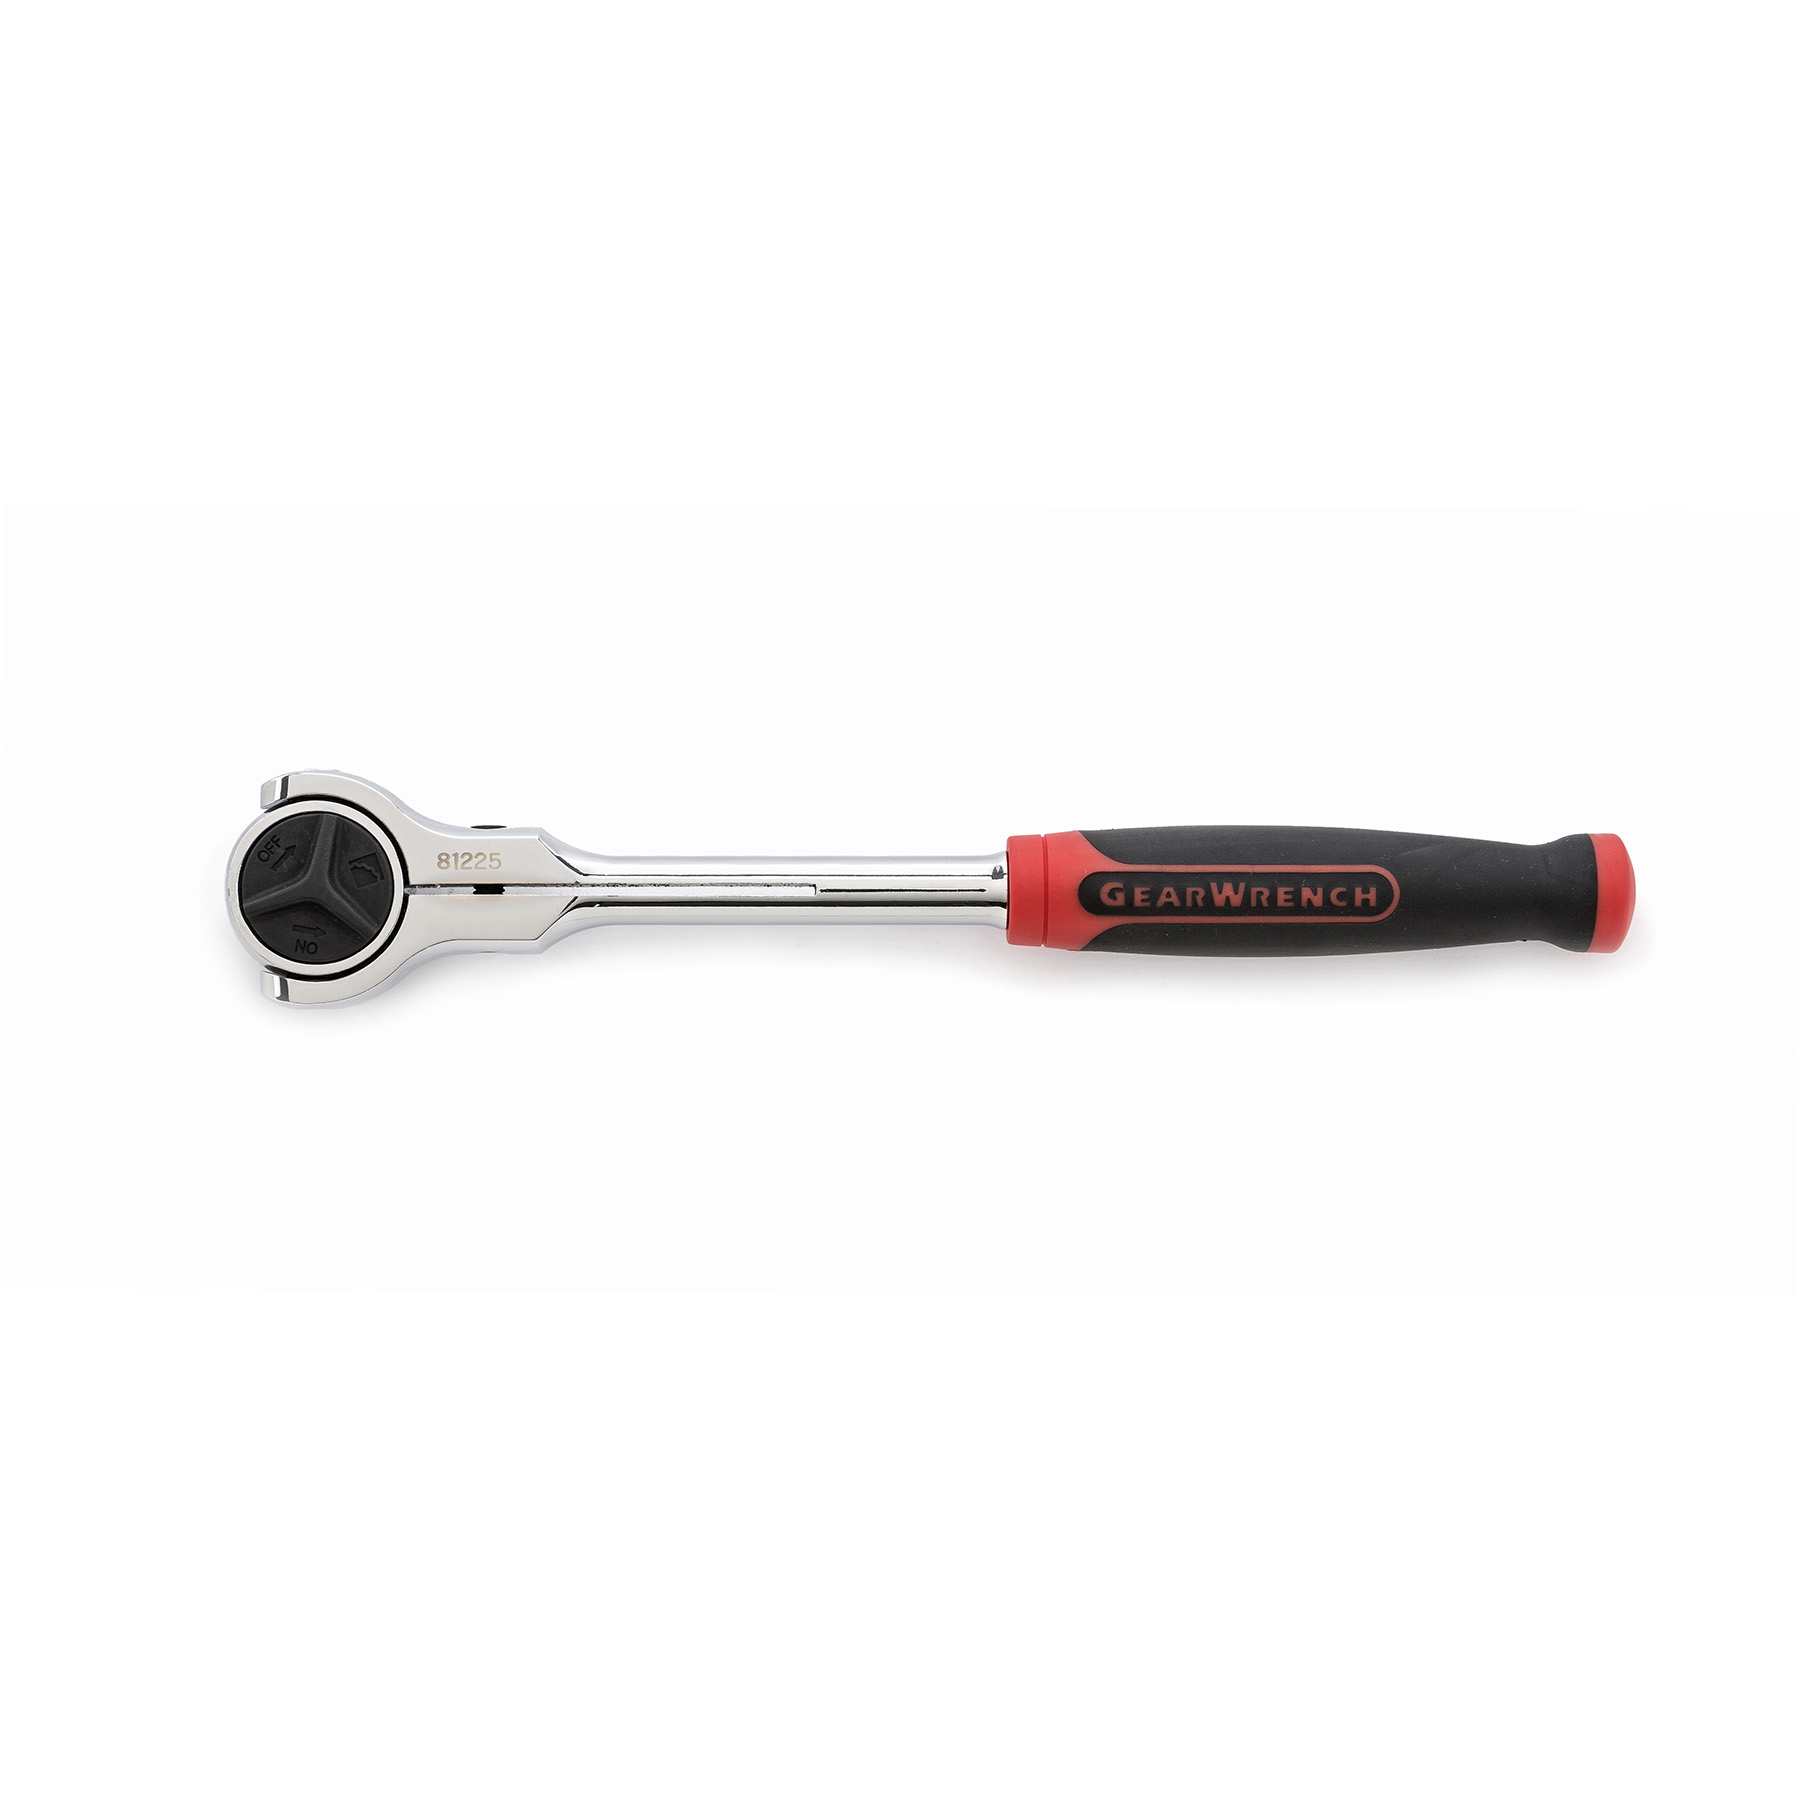 GearWrench 3/8" Drive Roto Cushion Grip Ratchet